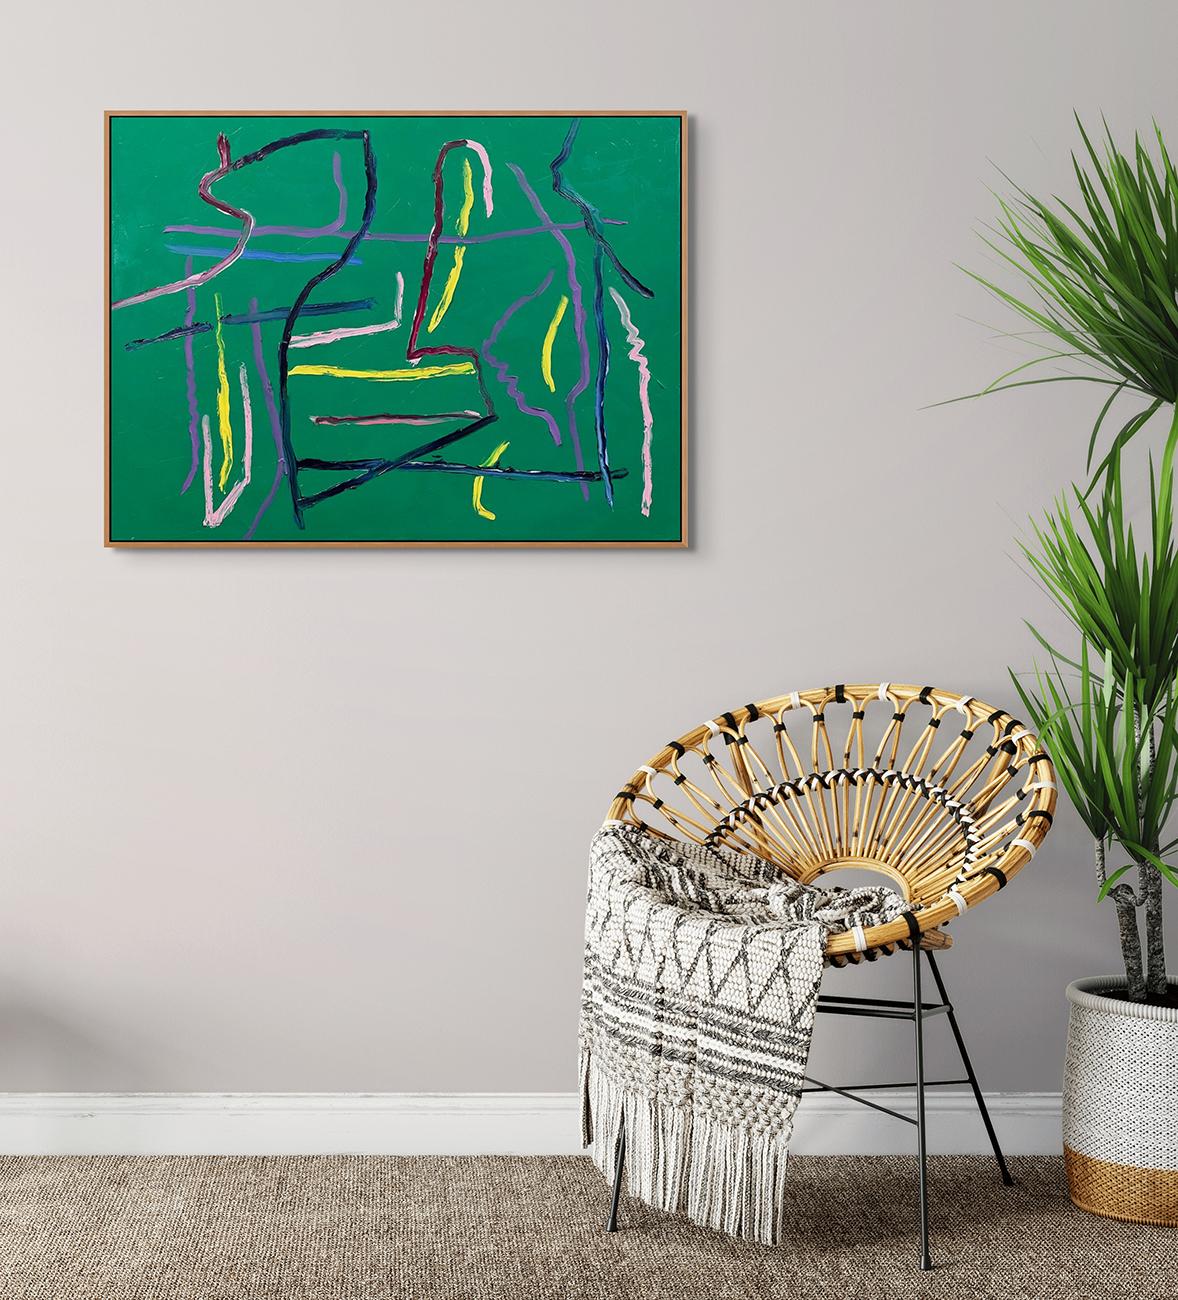 Before Or After (Abstract painting) - Painting by Dana Gordon